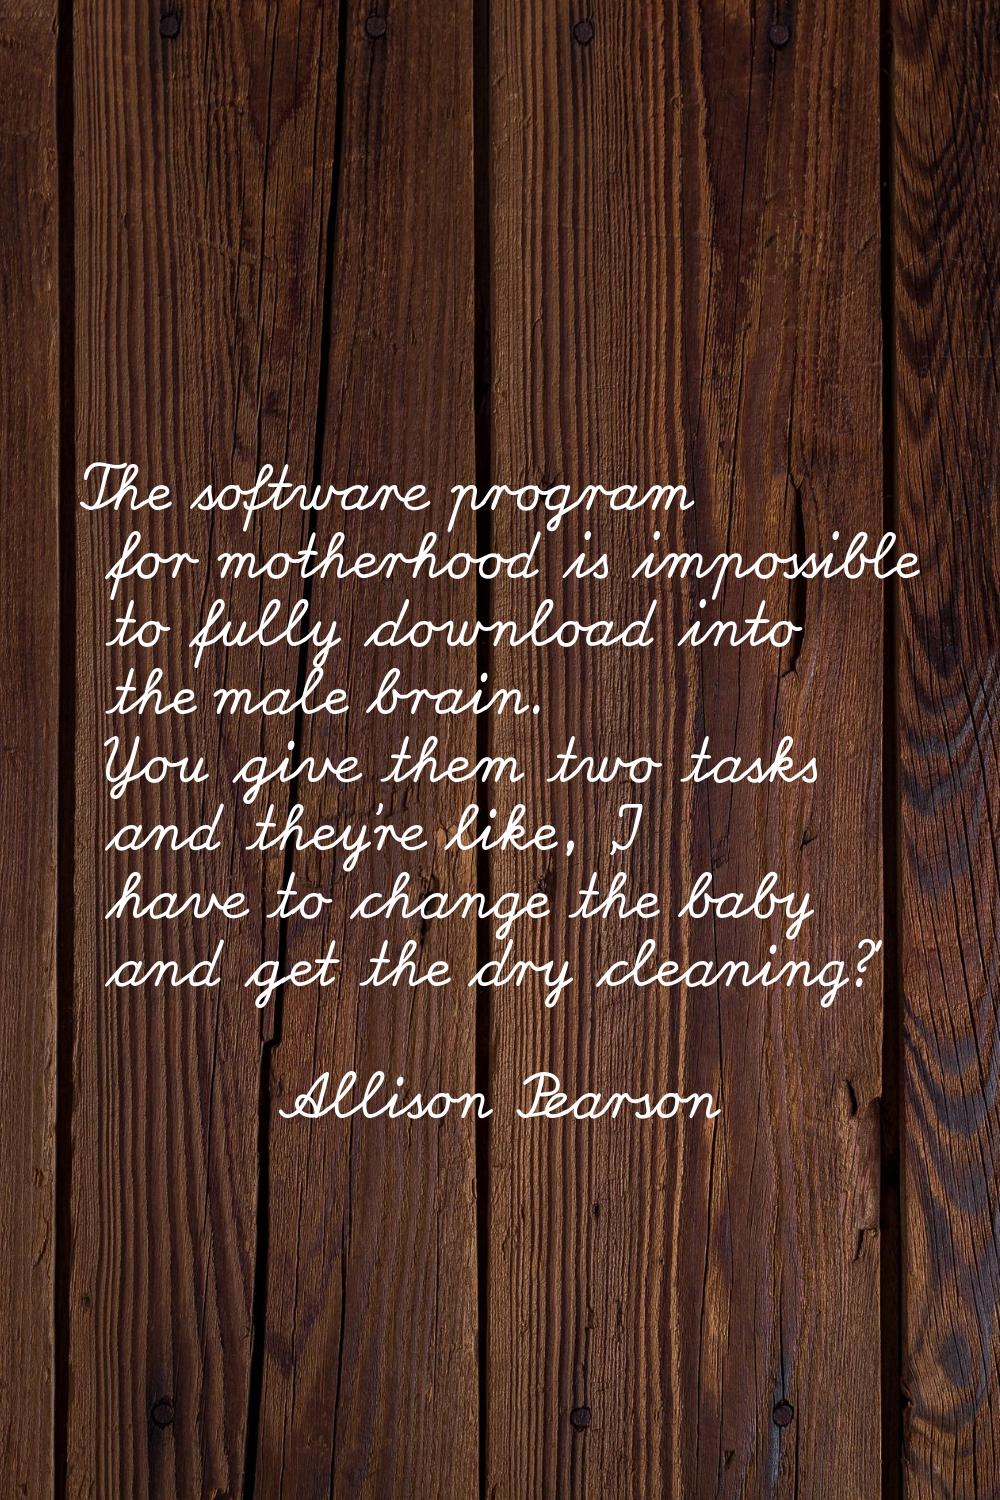 The software program for motherhood is impossible to fully download into the male brain. You give t